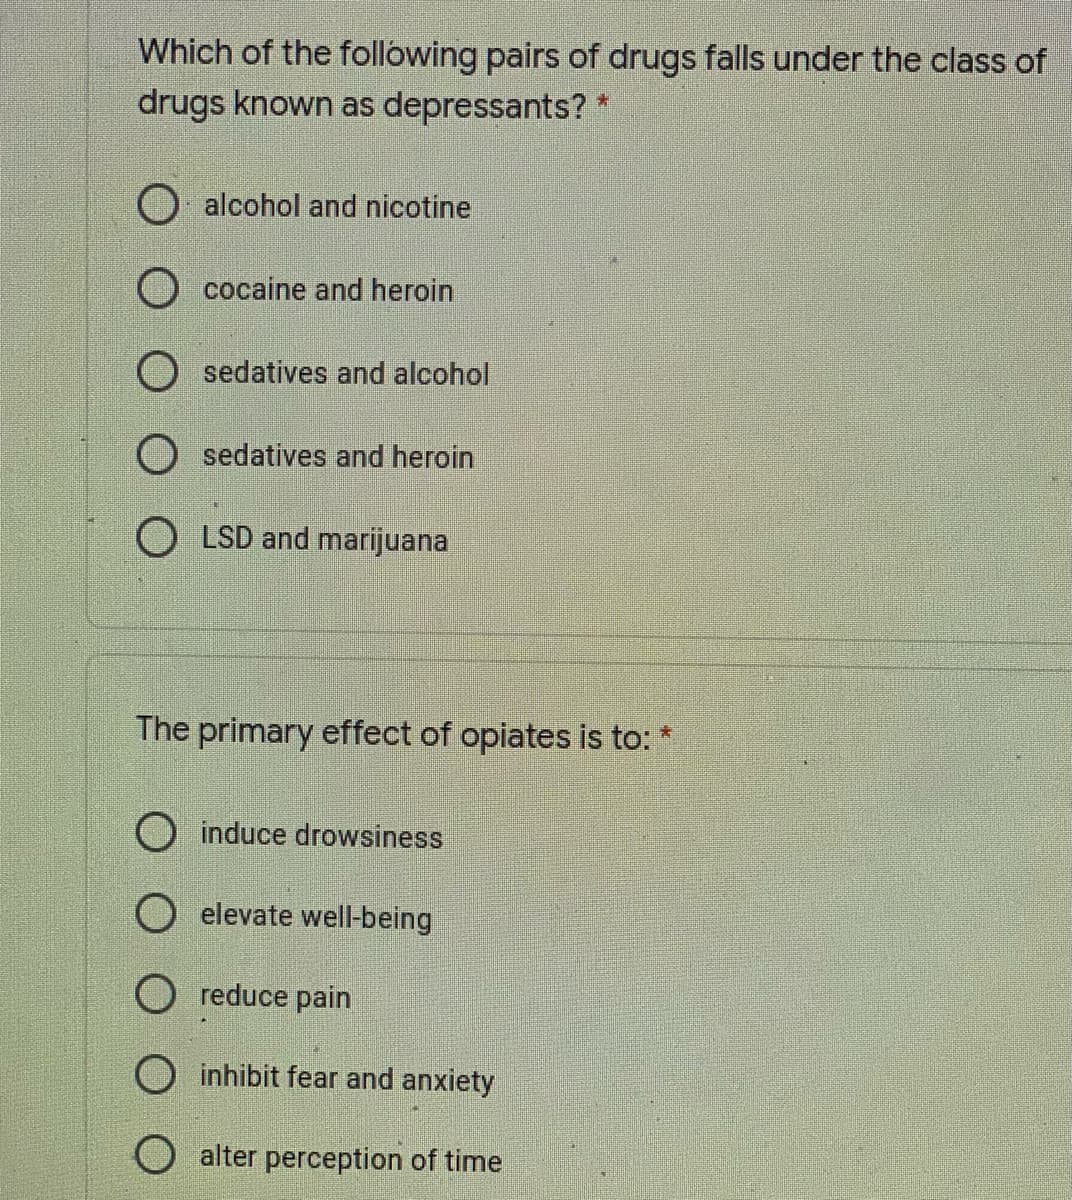 Which of the following pairs of drugs falls under the class of
drugs known as depressants? *
O alcohol and nicotine
cocaine and heroin
sedatives and alcohol
O sedatives and heroin
O LSD and marijuana
The primary effect of opiates is to:
*:
O induce drowsiness
elevate well-being
O reduce pain
O inhibit fear and anxiety
alter perception of time
